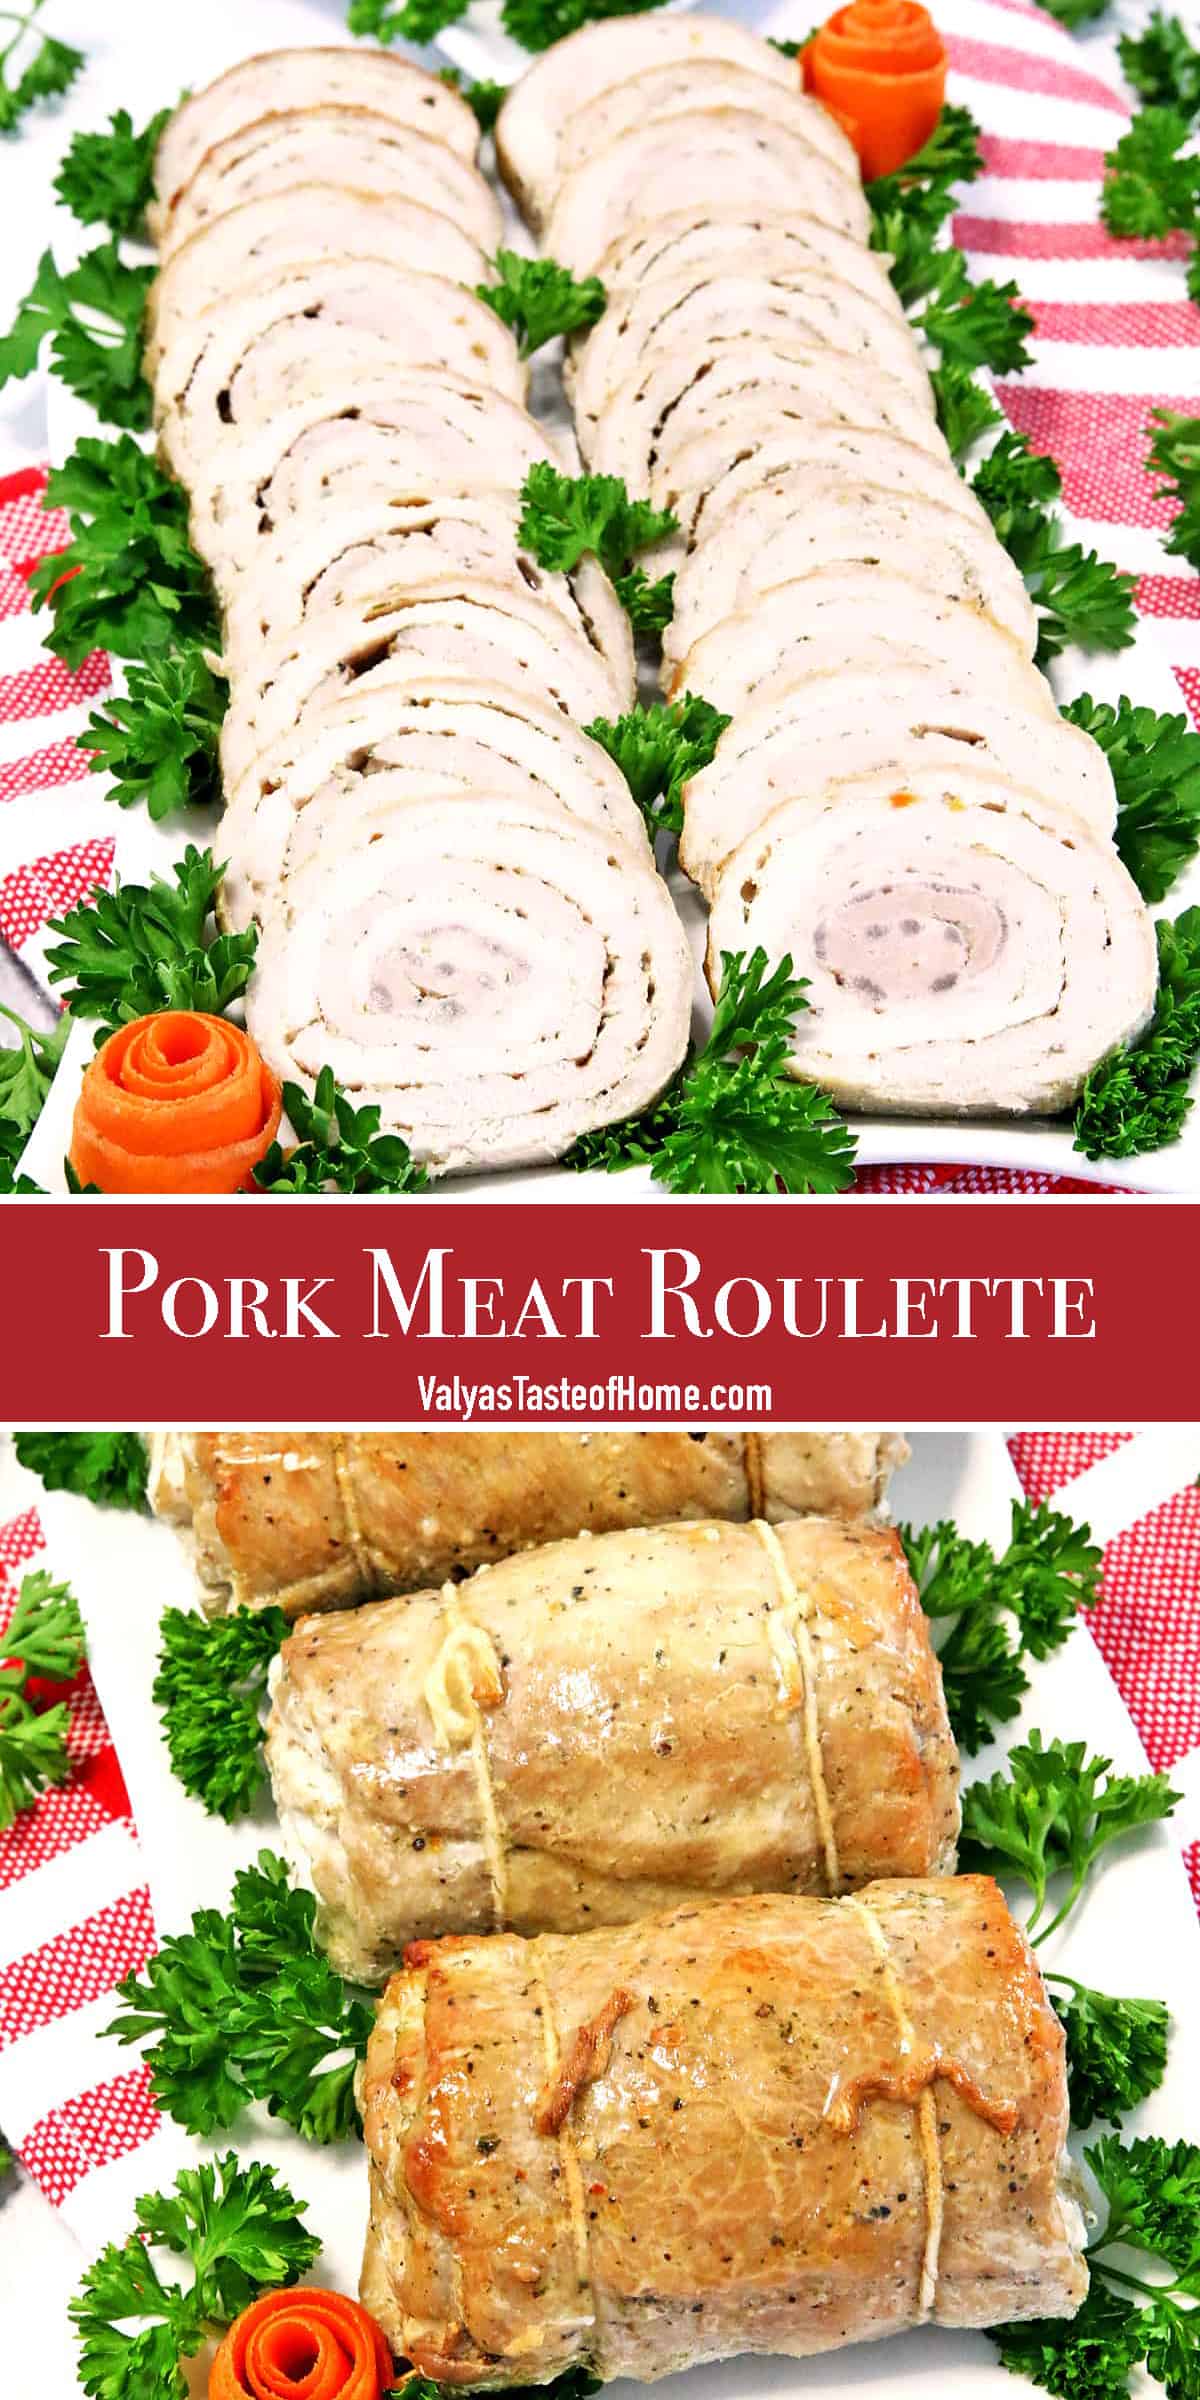 This Pork Meat Roulette is a fairly special traditional recipe that is usually passed down in the family and mostly brought out for special occasions. It is unique, scrumptious, and perfect for your Christmas dinner!